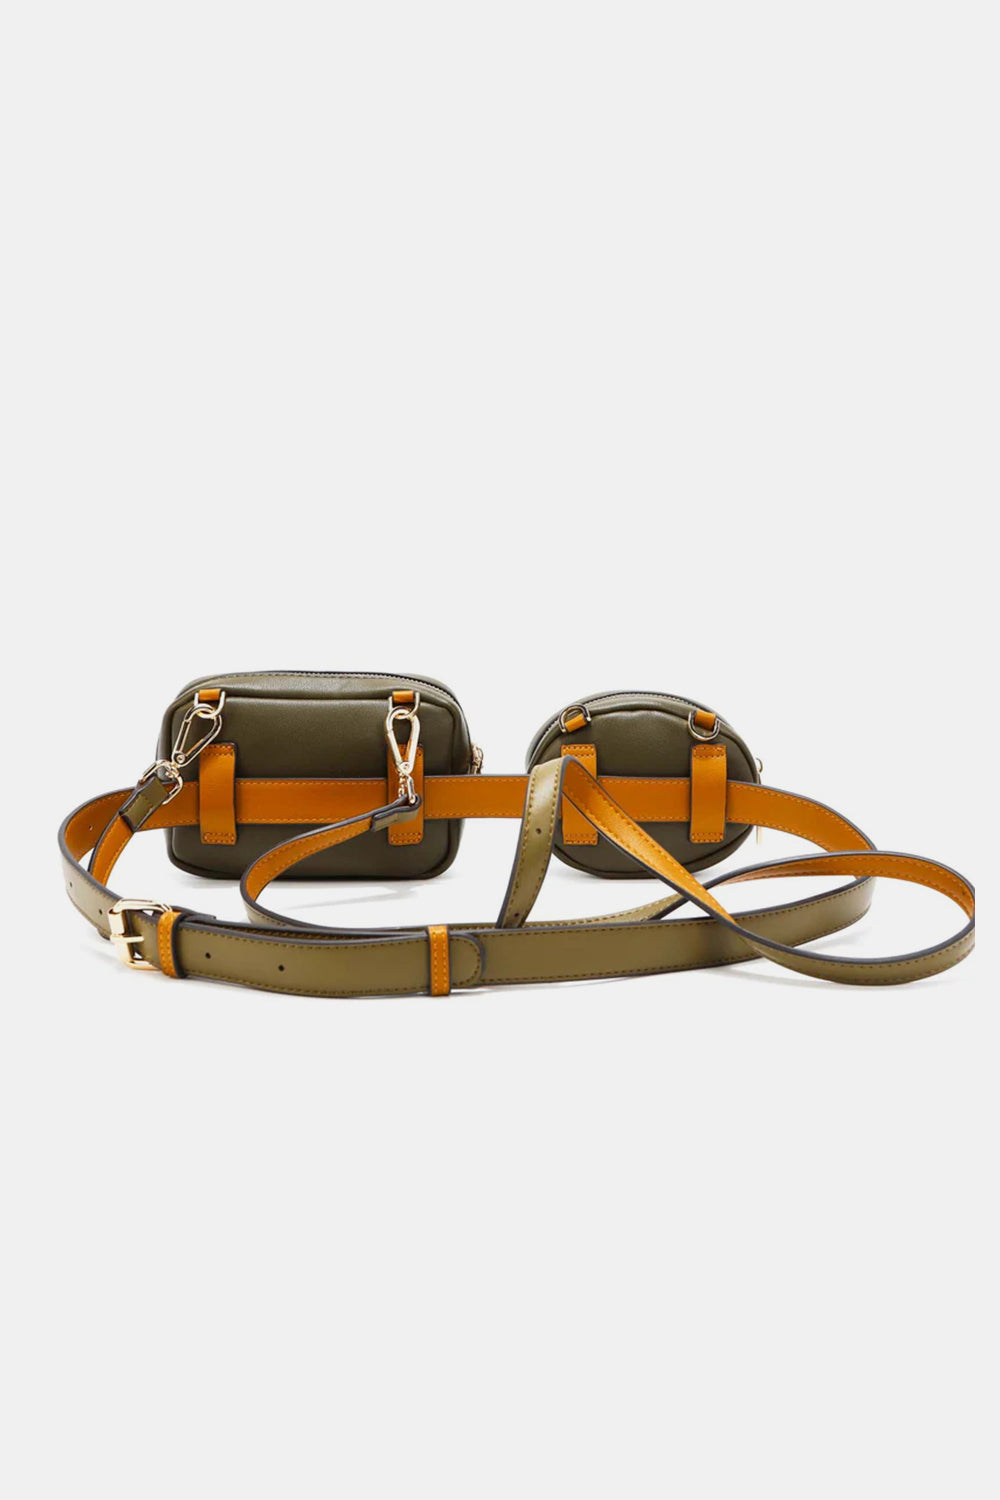 Nicole Lee USA Double Pouch Fanny Pack - AllIn Computer